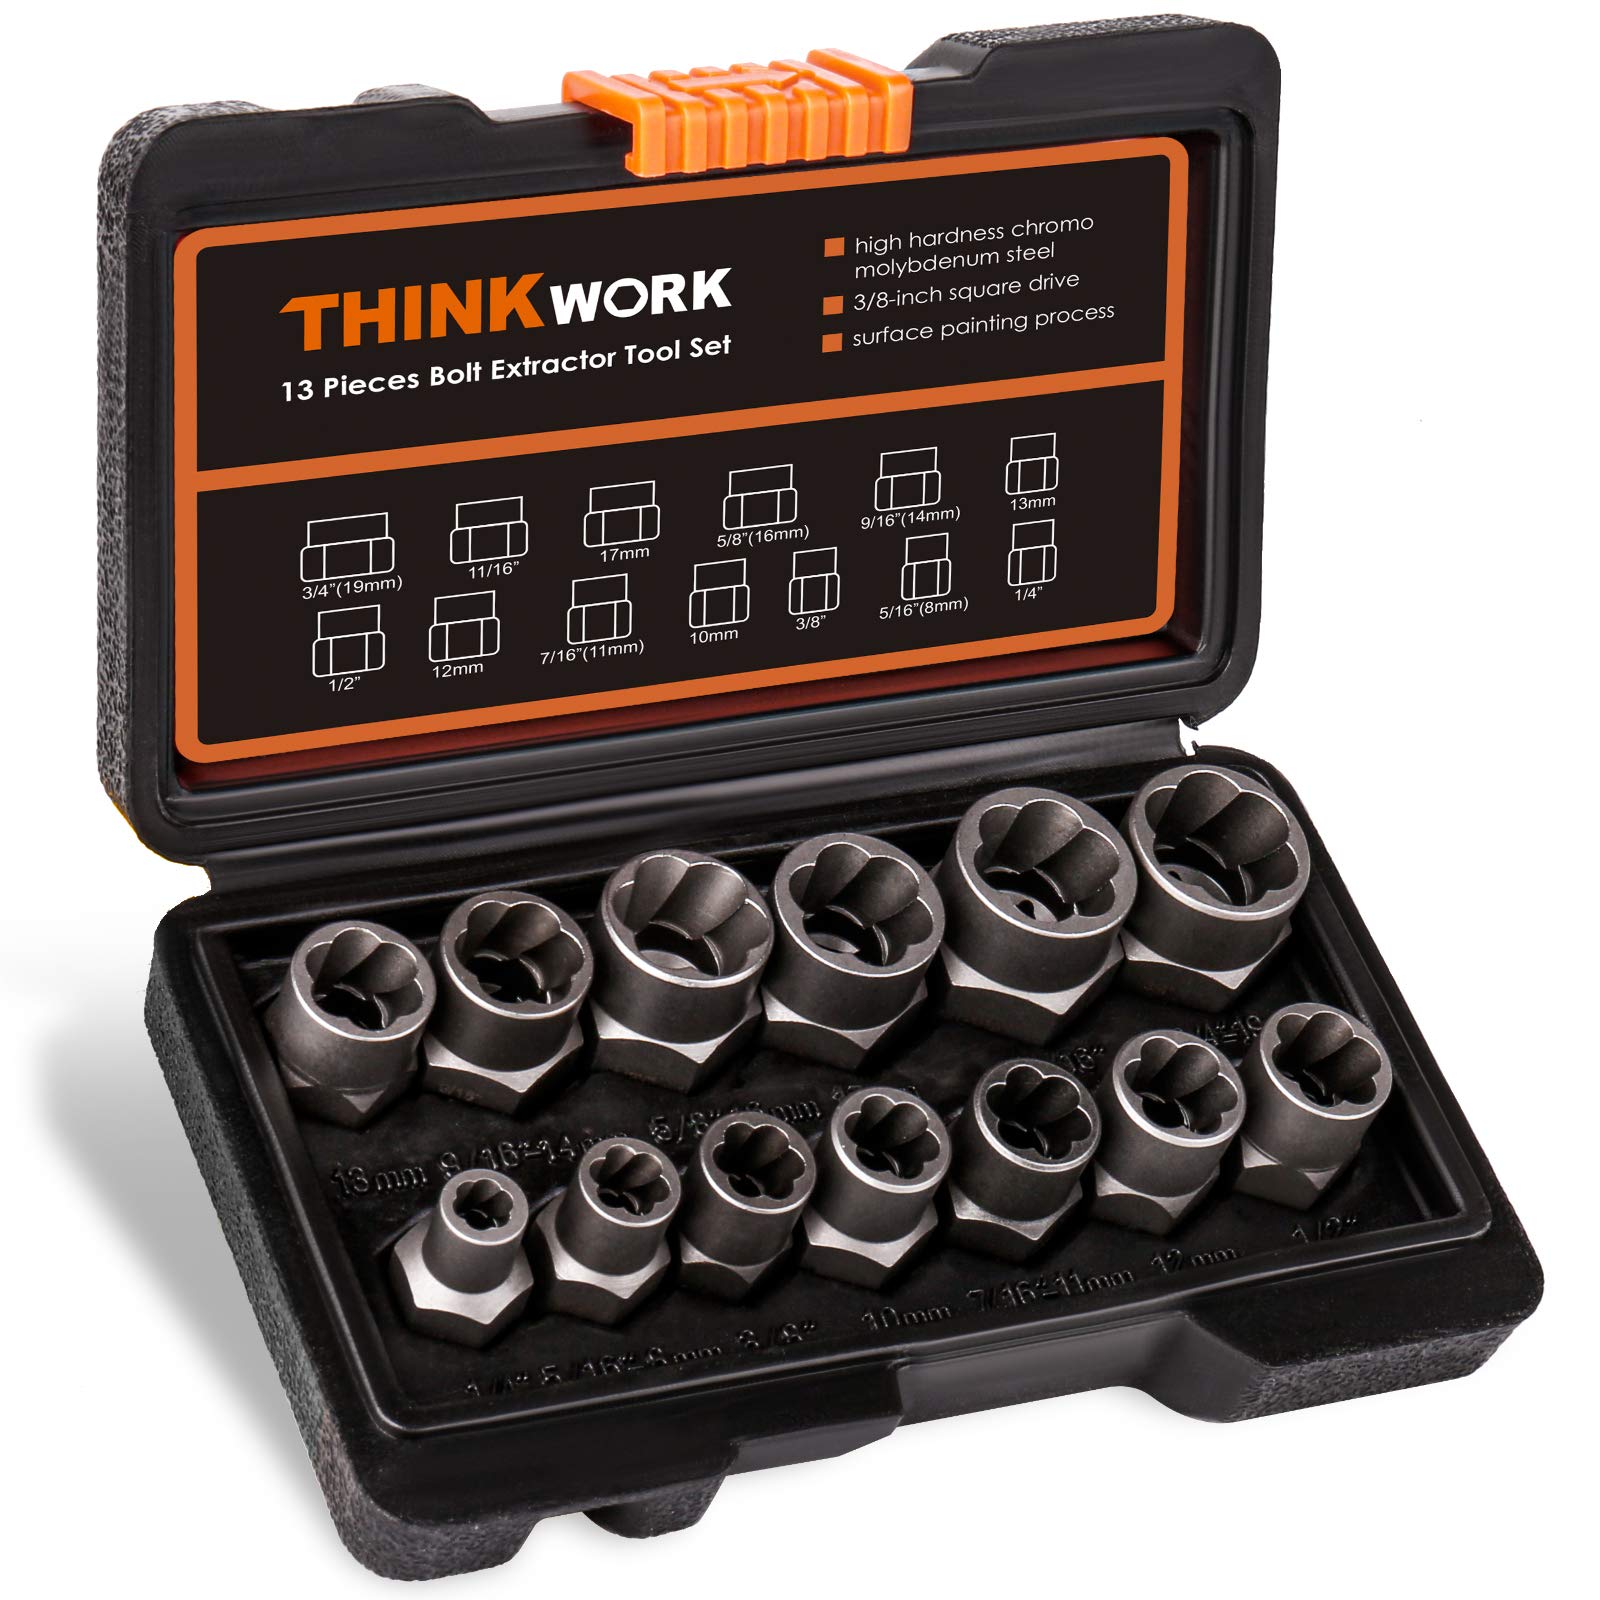 THINKWORK Bolt Extractor Set, 131 Pieces Impact Bolt Nut Remover Set, Stripped Lug Nut Remover, Extraction Socket Set for Removi